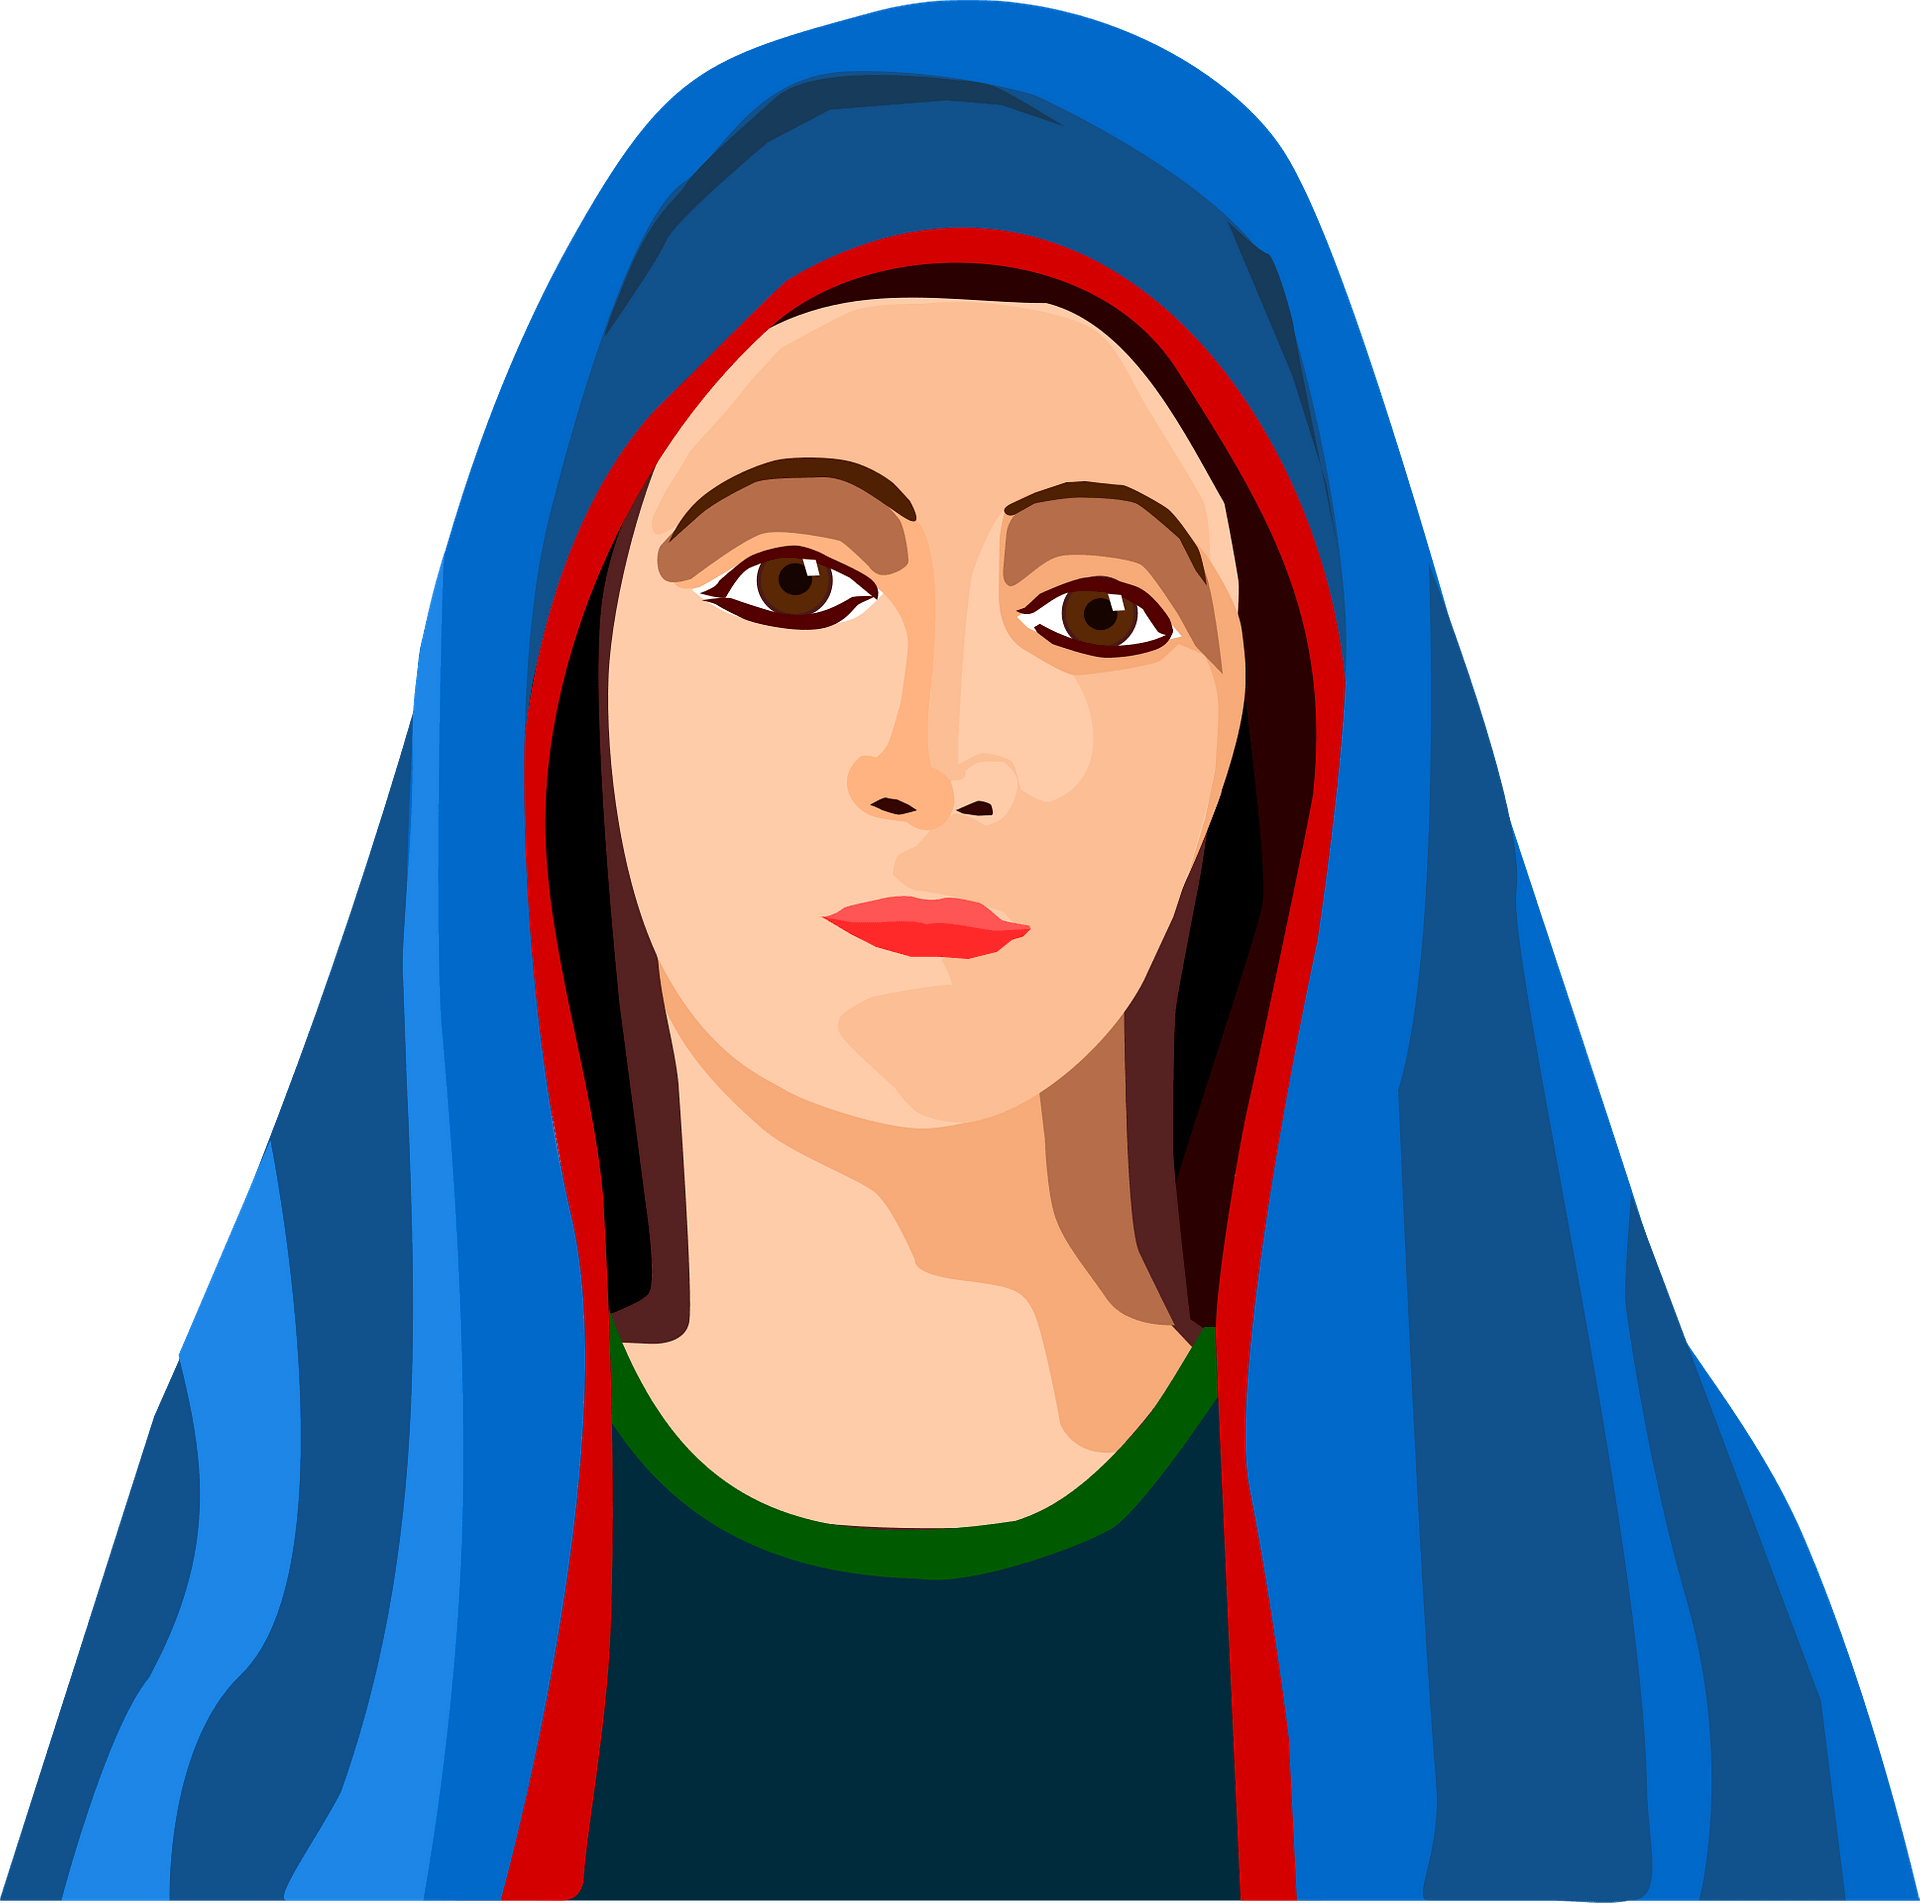 Blessed Virgin Mary Clip Art N12 free image download - Clip Art Library